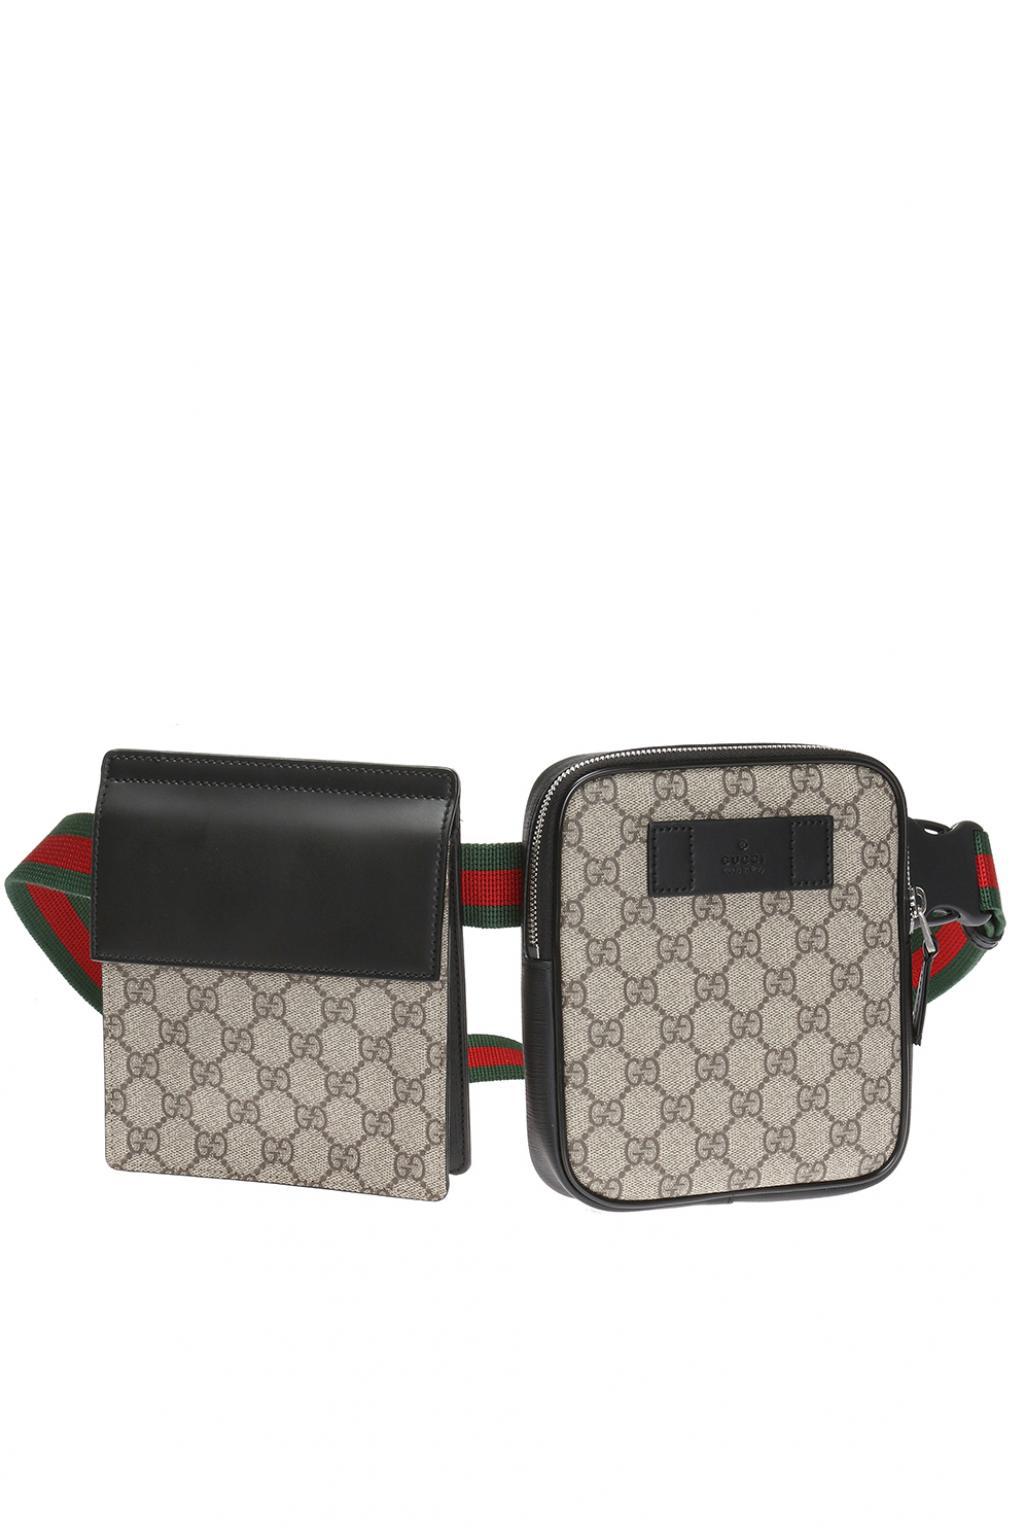 Gucci Belt Bag With 2 Pouches in Brown for Men | Lyst